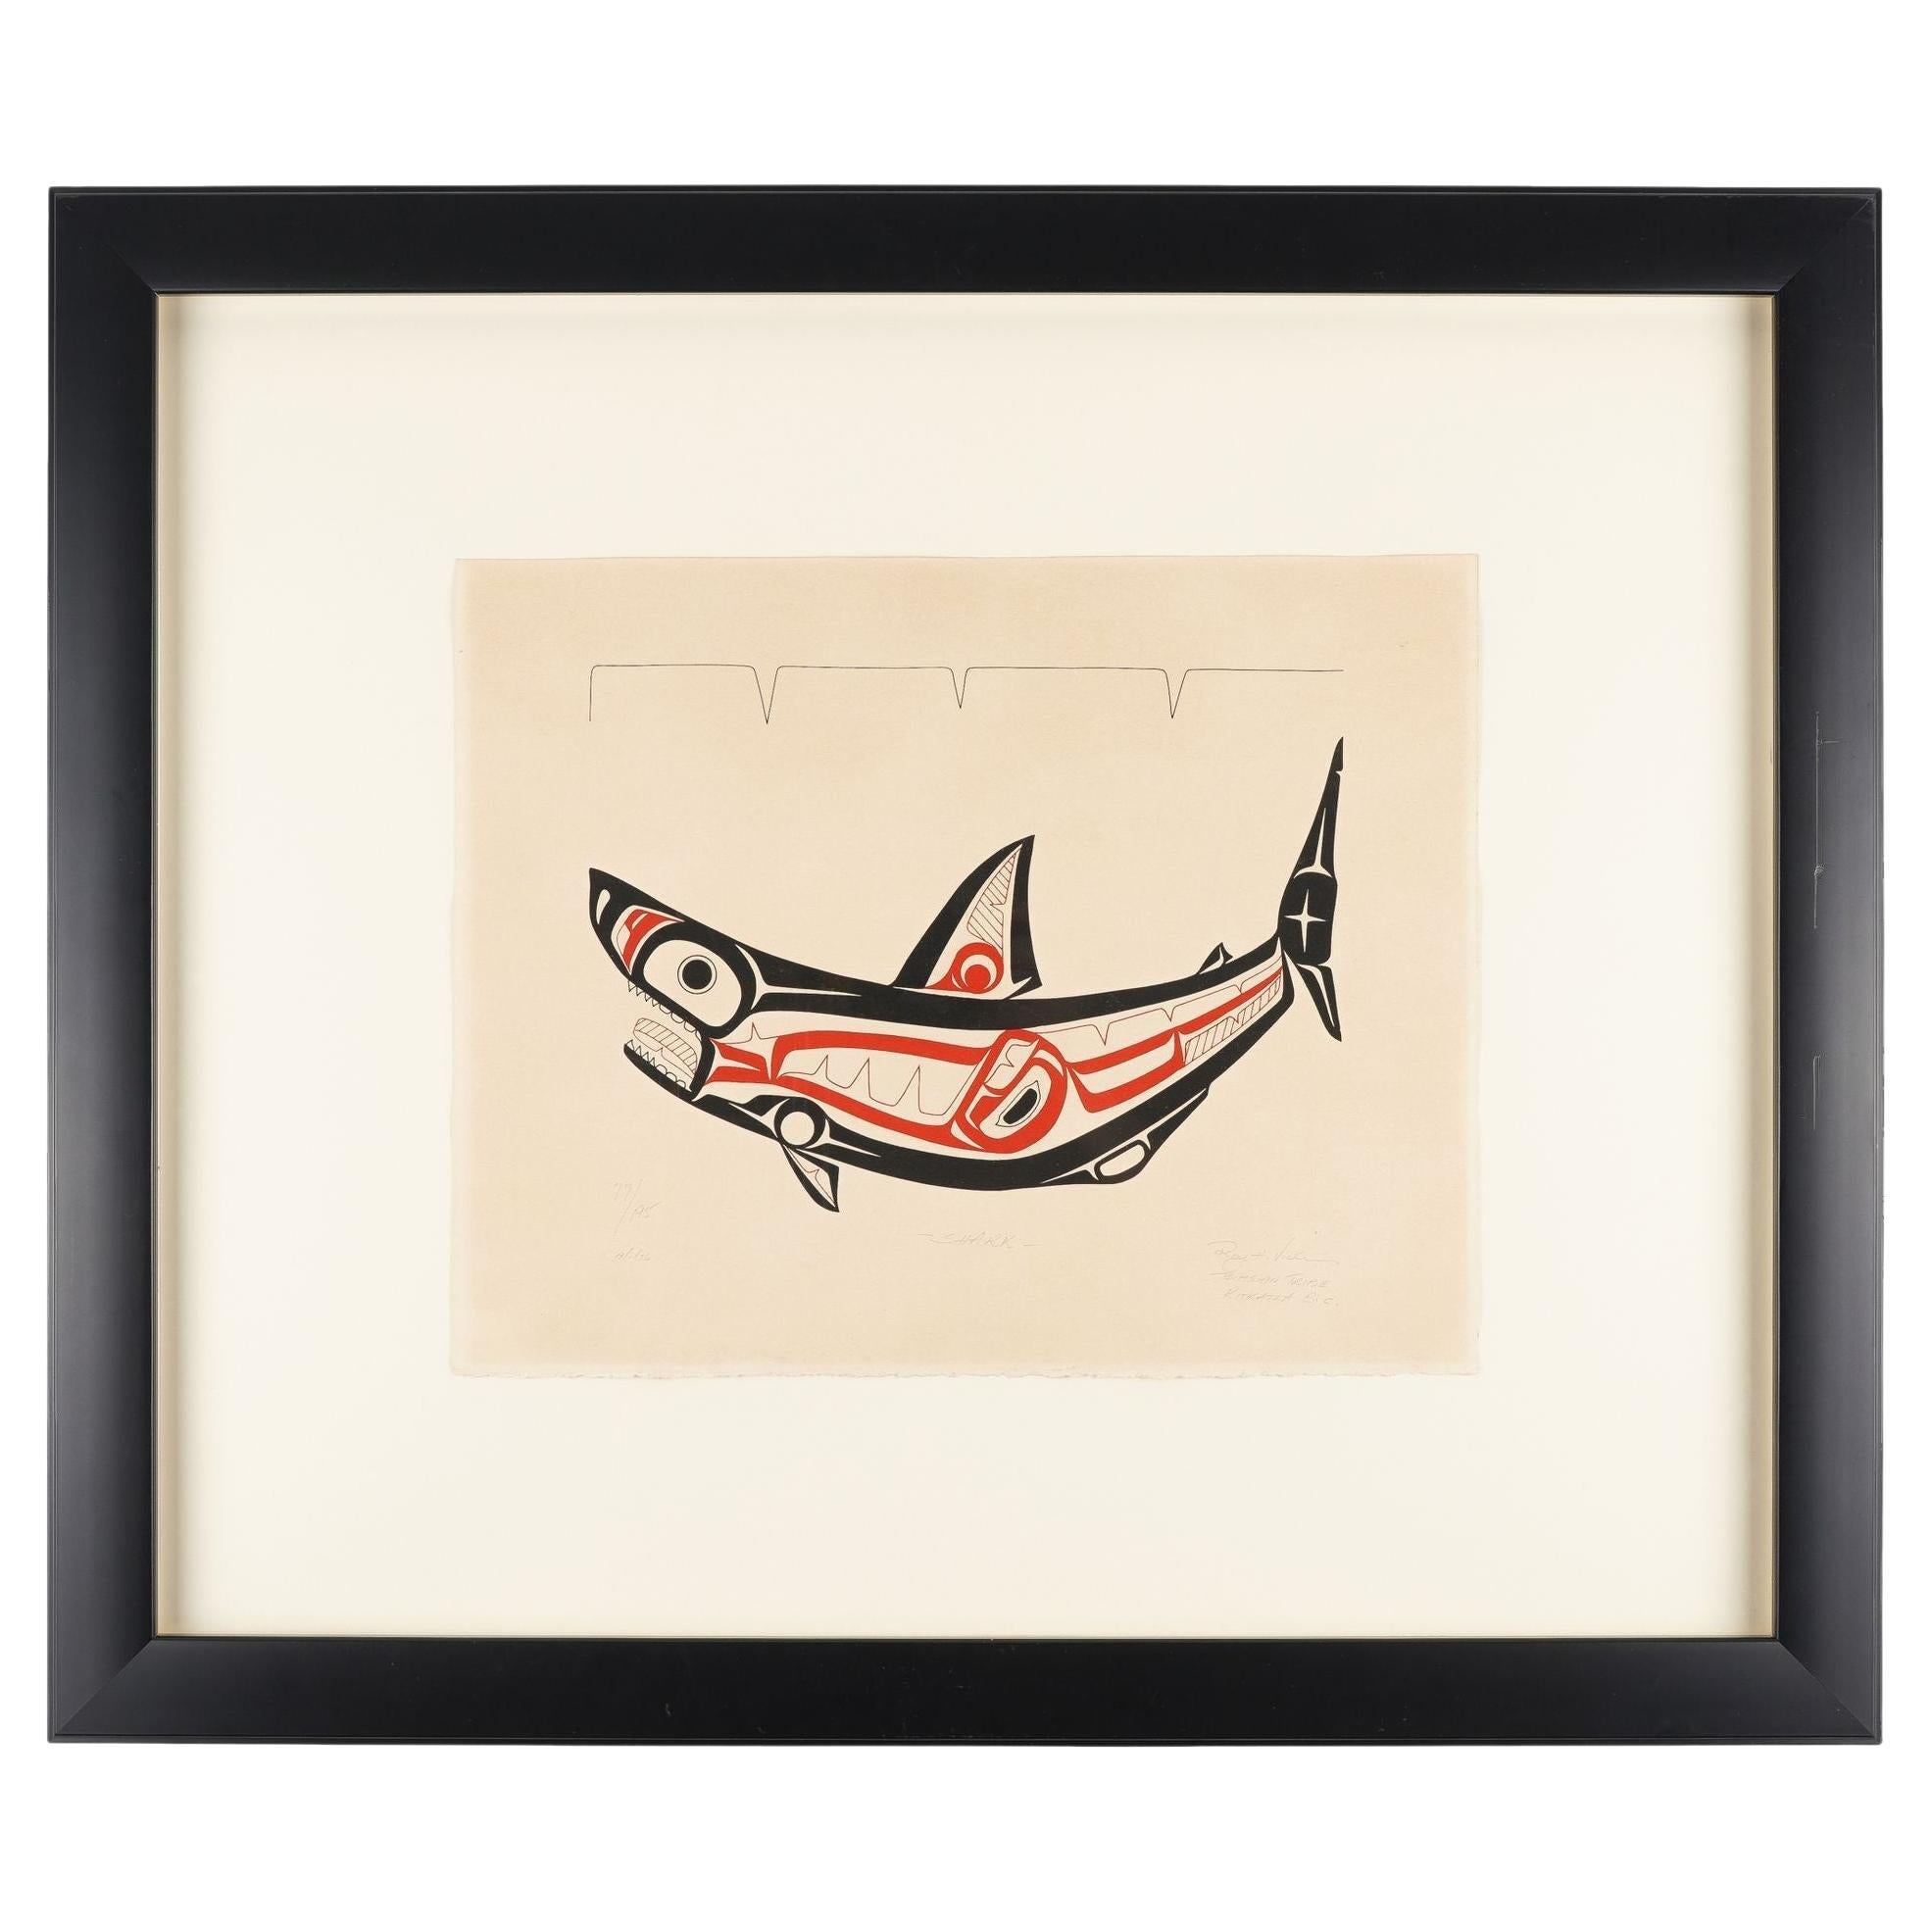 Shark by Roy Henry Vickers, 1976